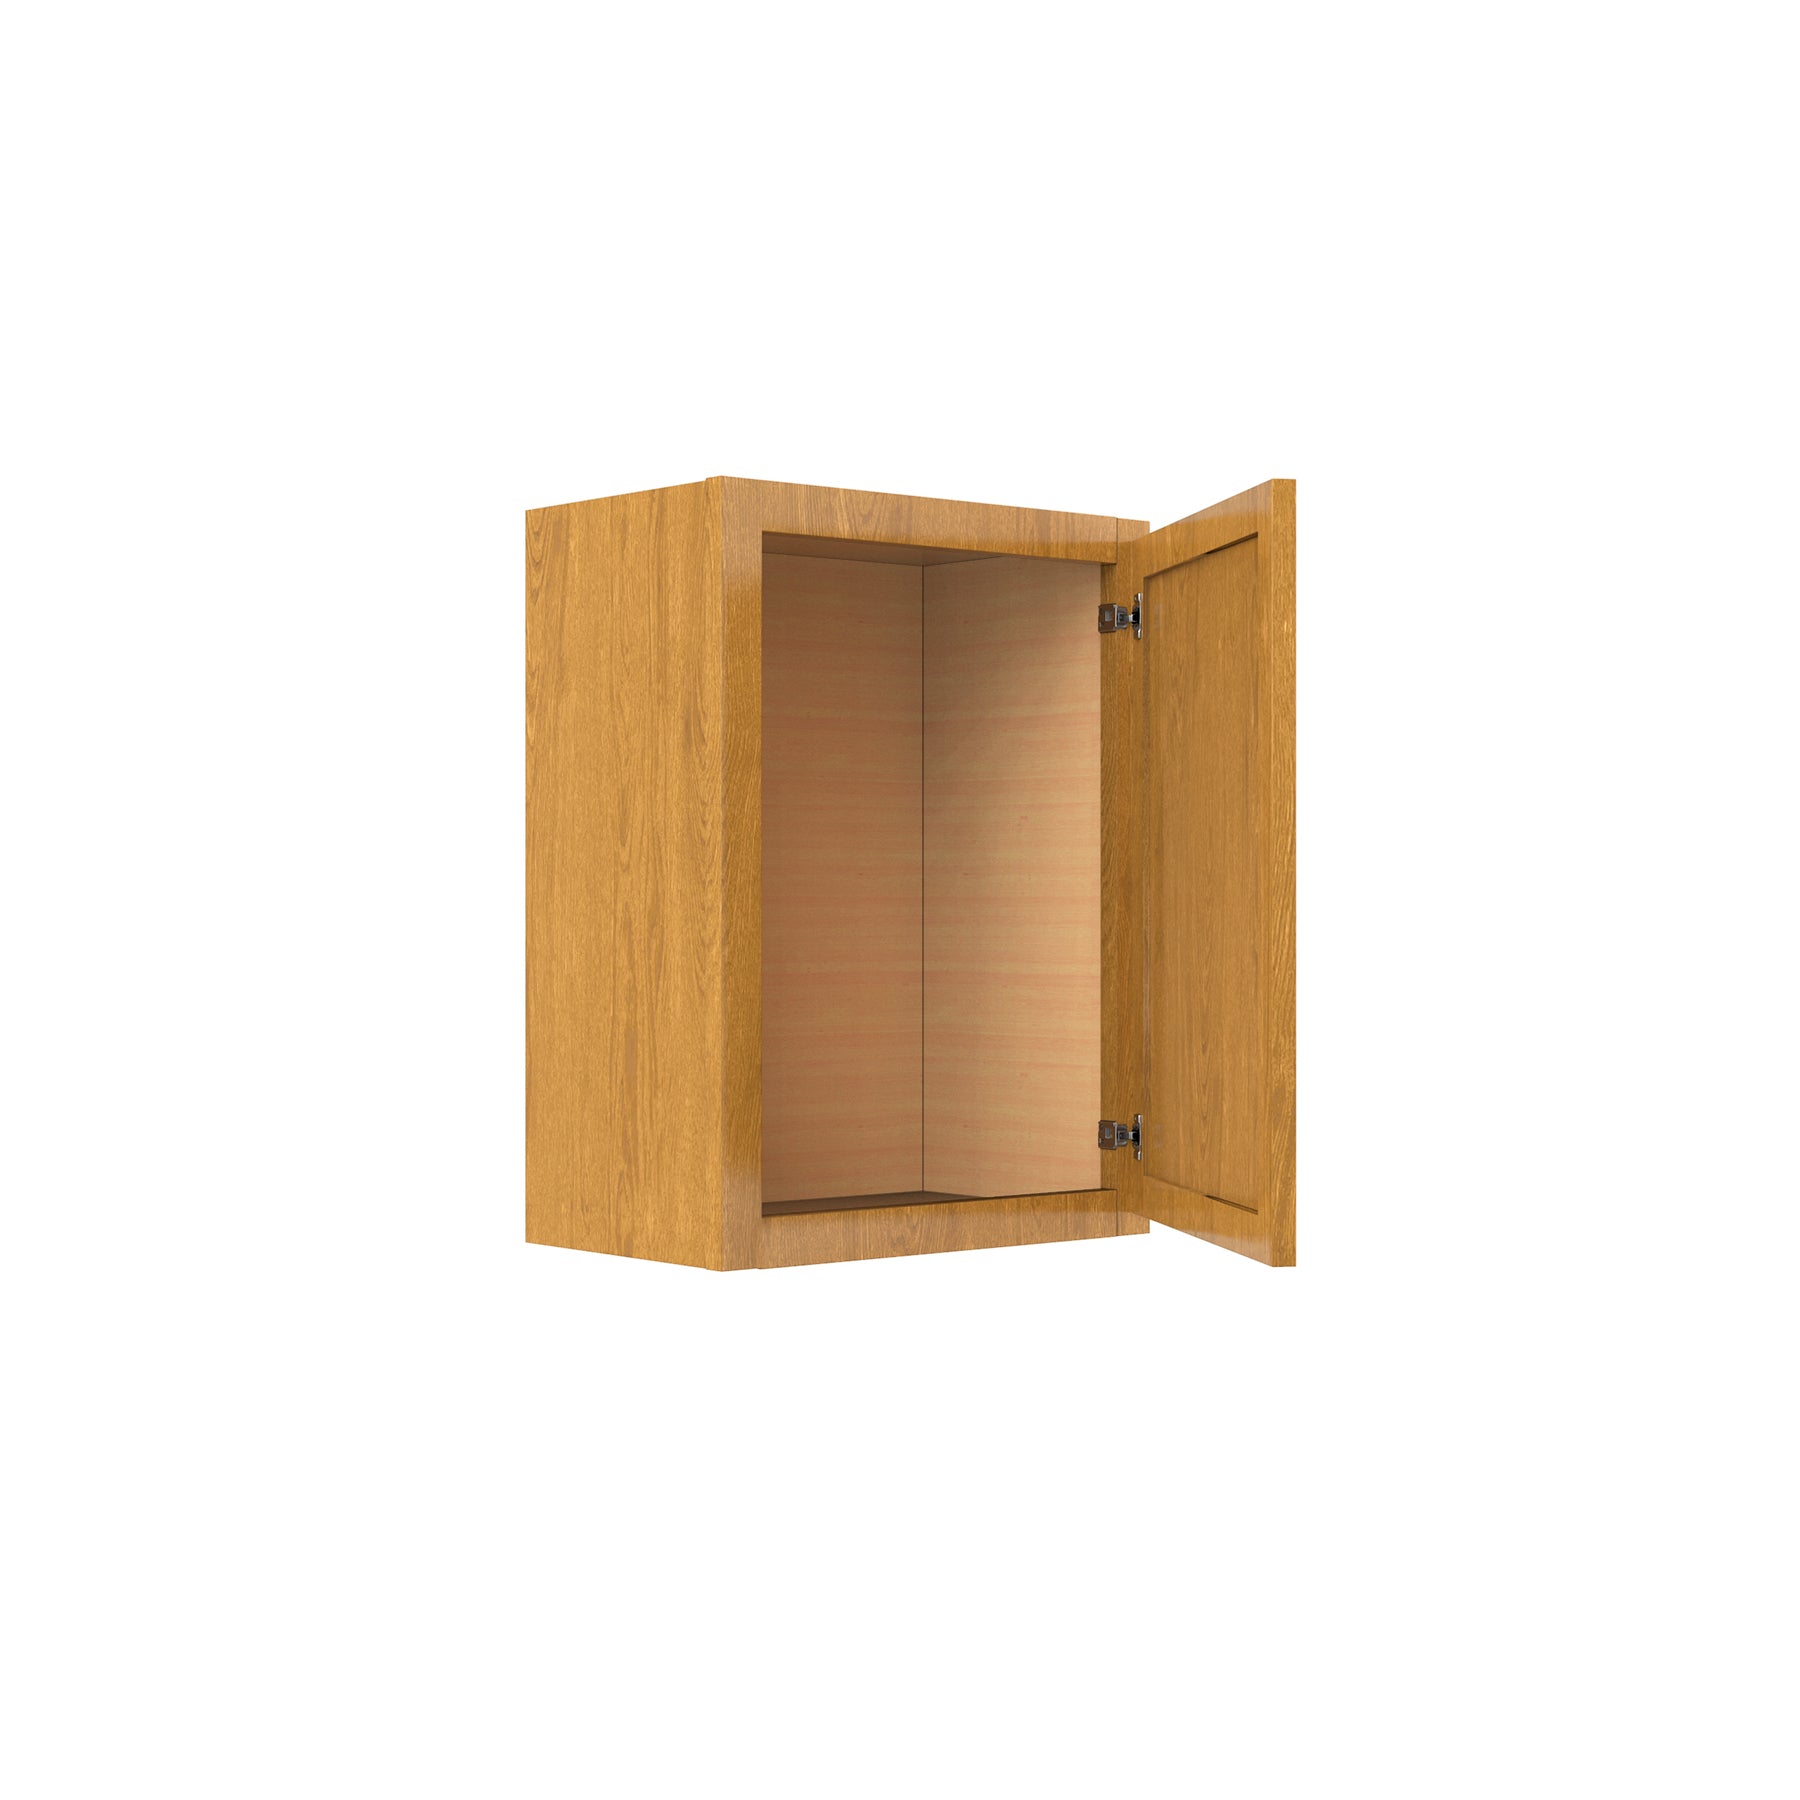 Country Oak 18"W x 24"H Wall Cabinet